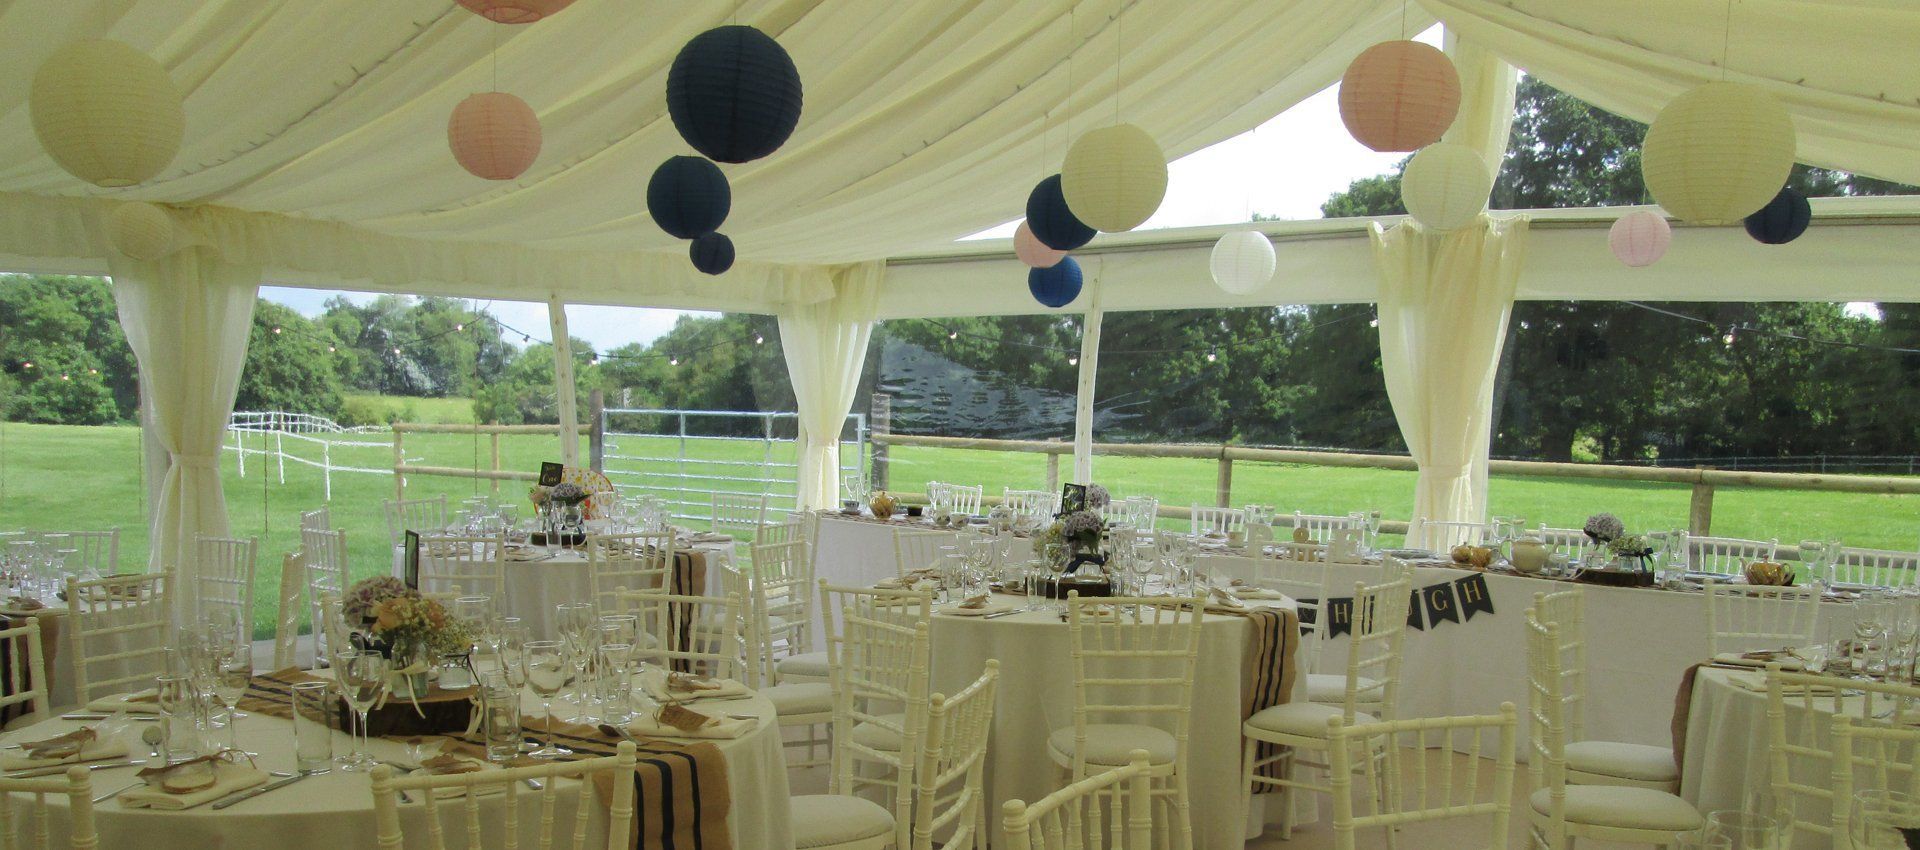 Cheshire wedding planning, marquee hire cheshire